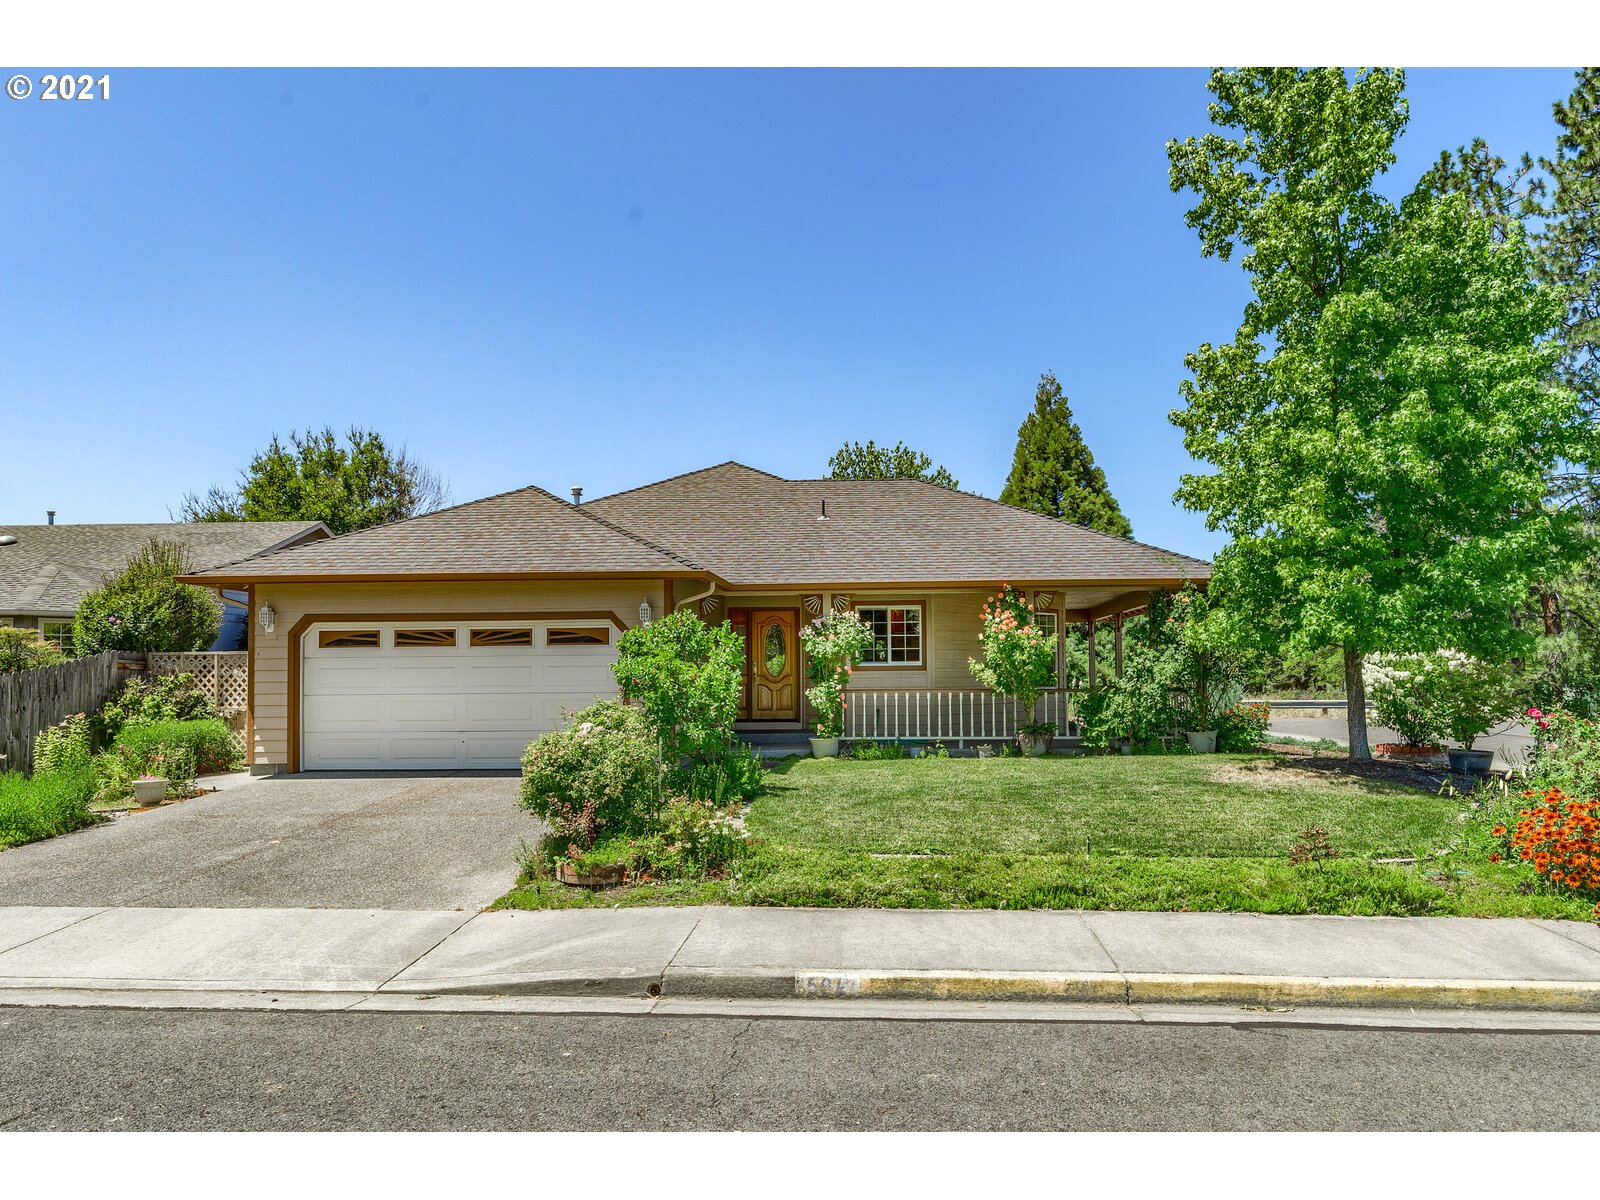 504 SW ANIQUE LN (1 of 30)